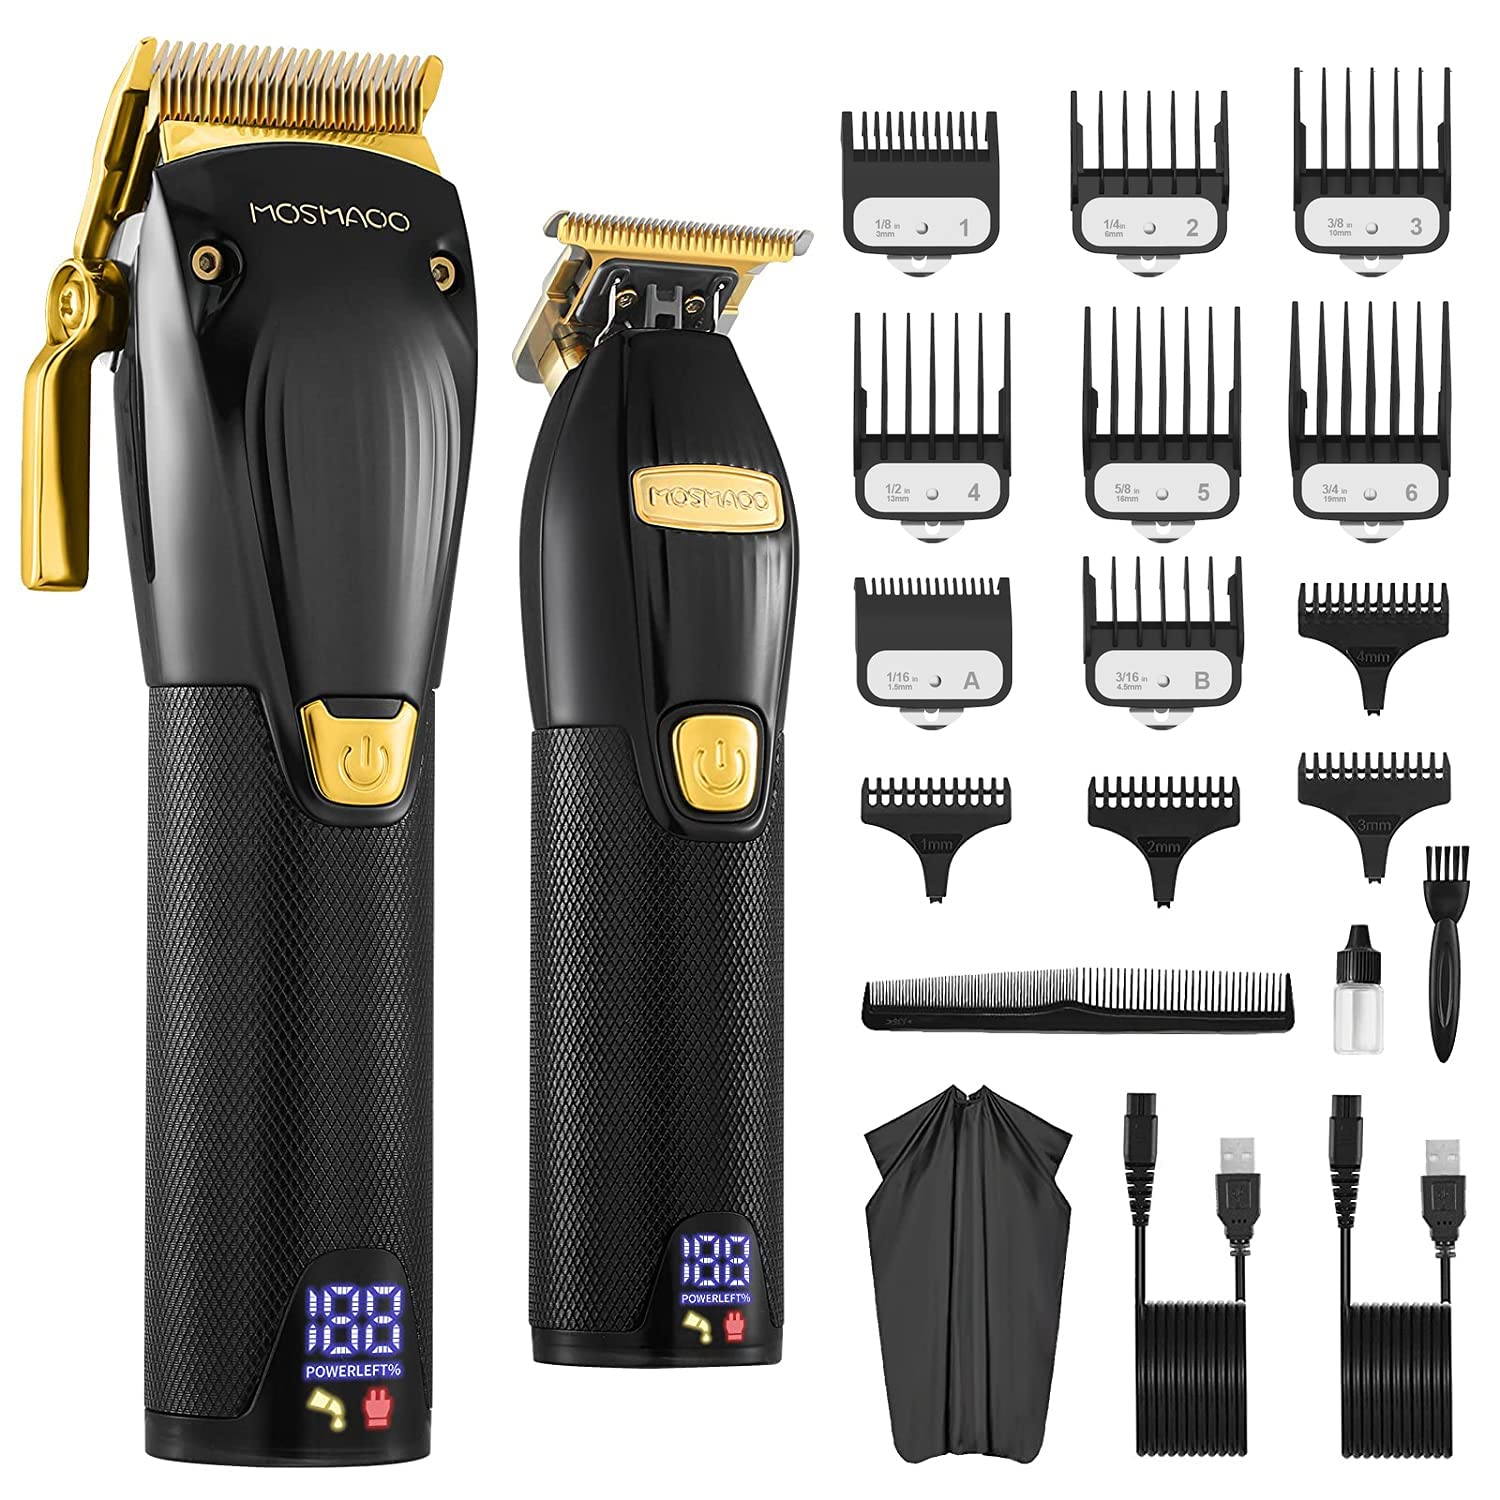 MOSMAOO Professional Cordless Hair Clippers and Hair Trimmer Combo Set for  BarbersStylists, Clippers for Hair Cutting